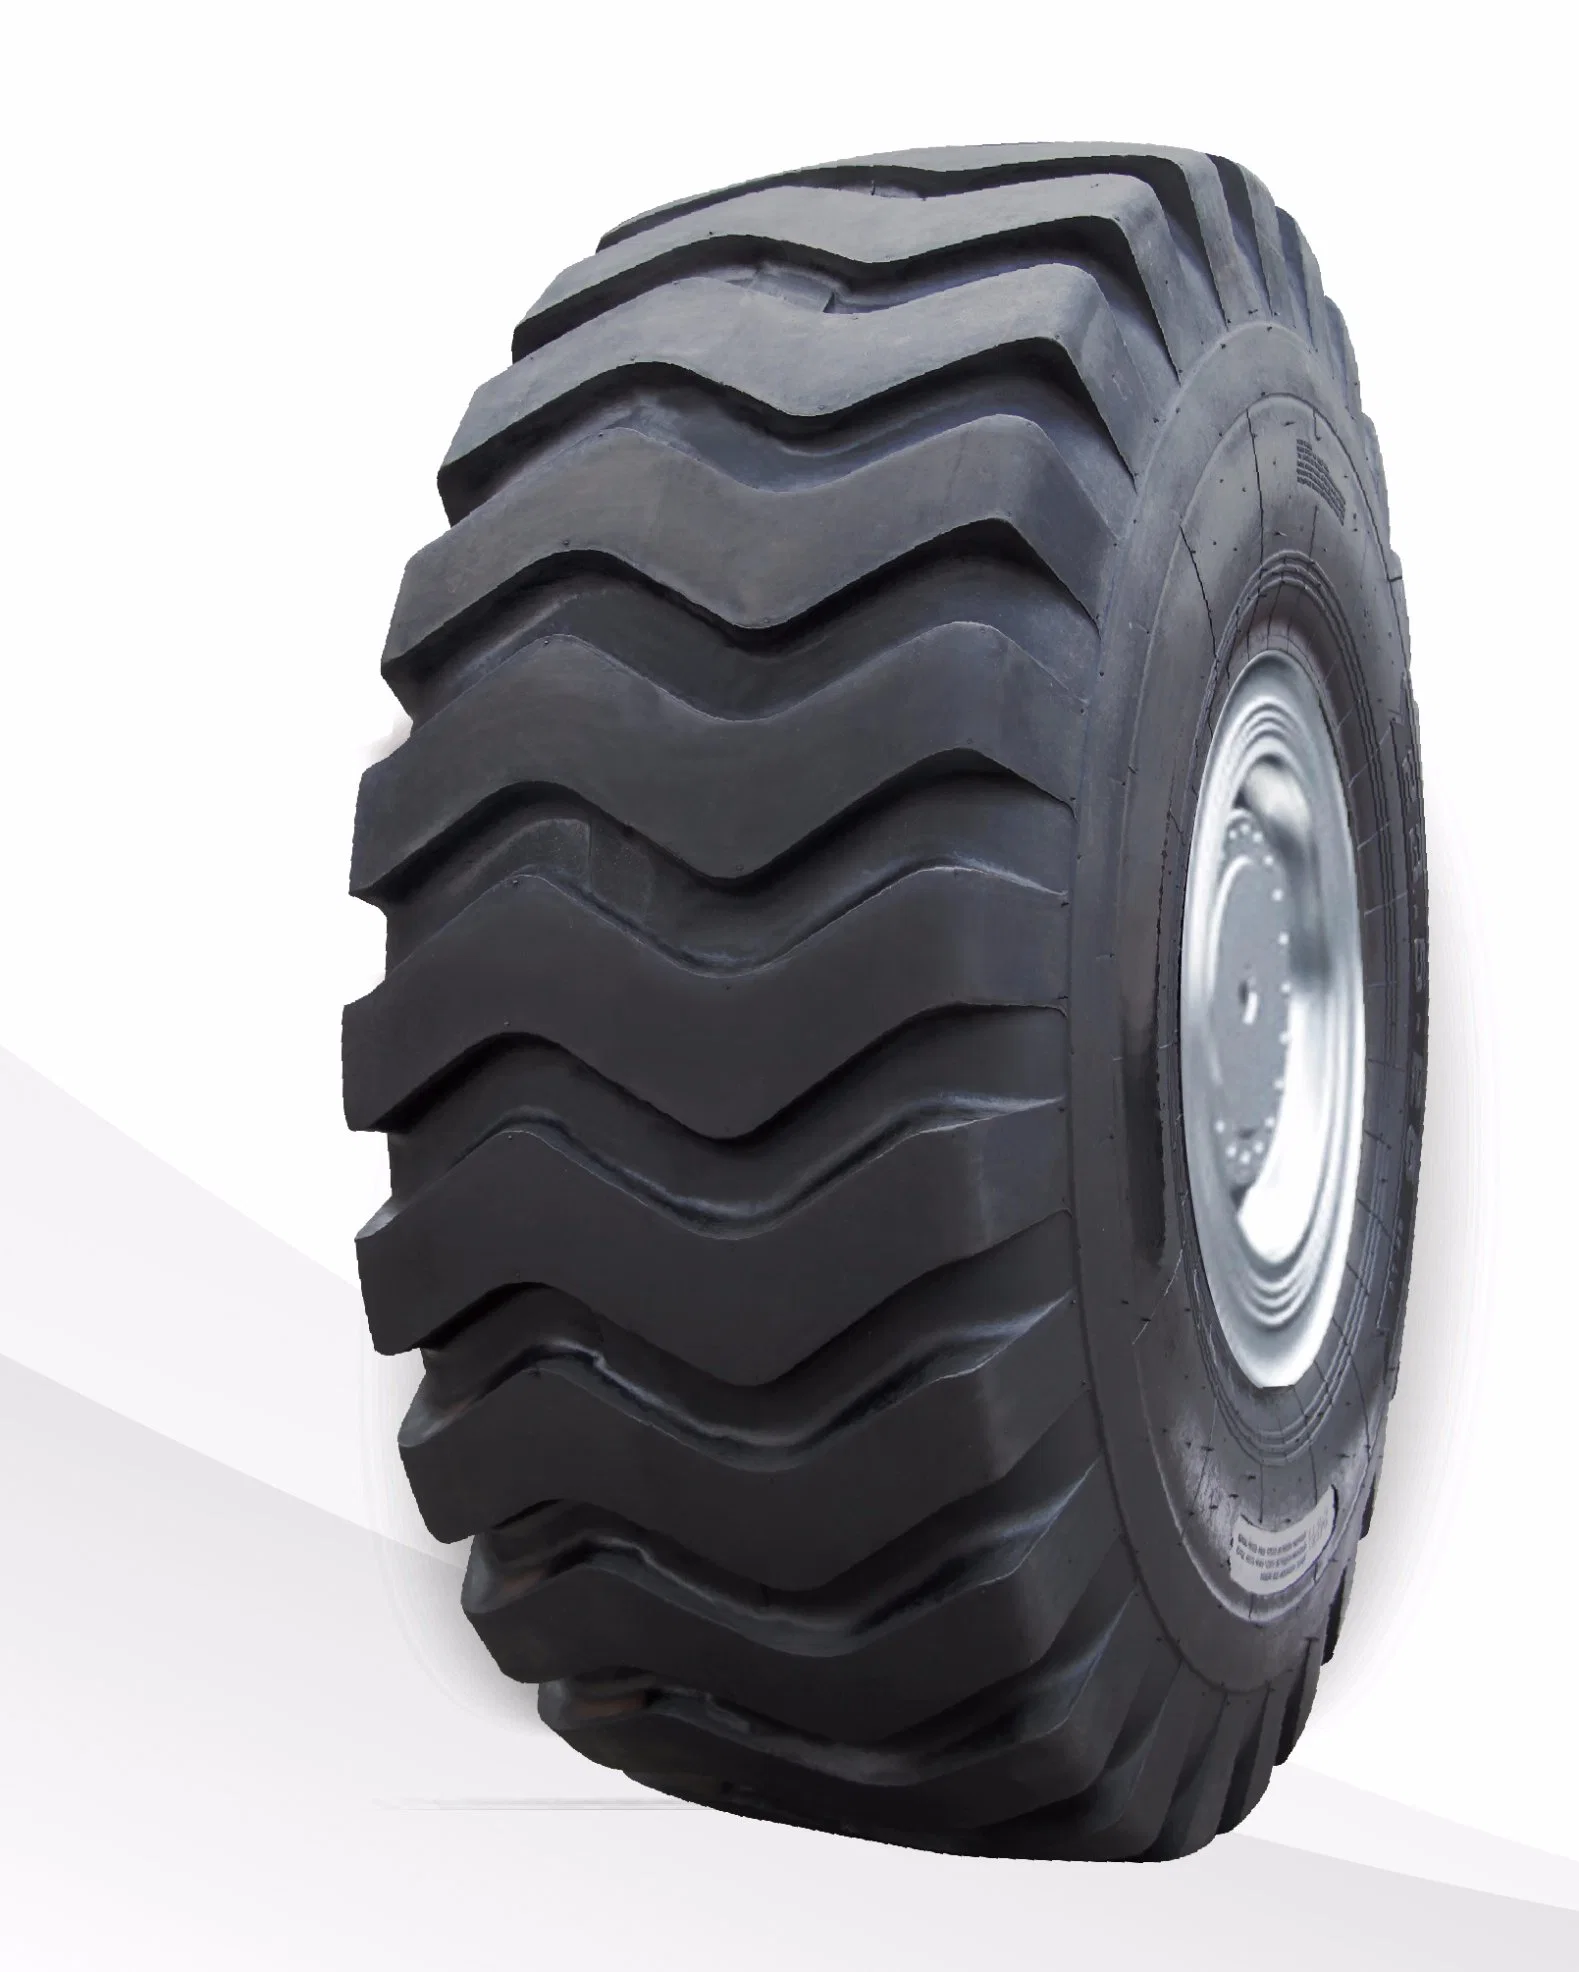 Taihao Tyre Factory Supply E3 L3 (W1W2) 18.00-25 Backhoe OTR Tyres